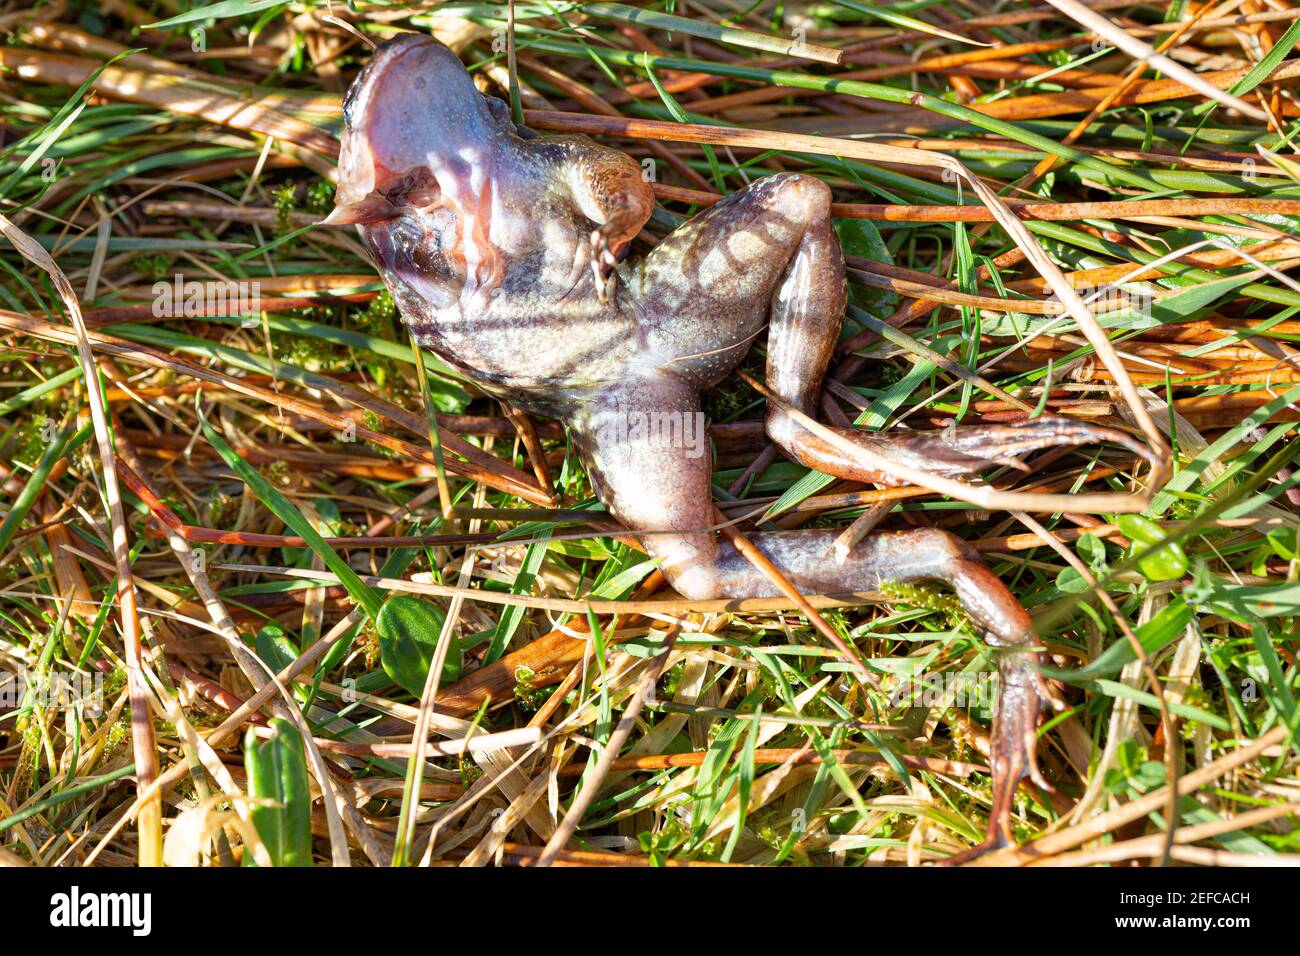 Dead frog with missing front limb Missing Stock Photo